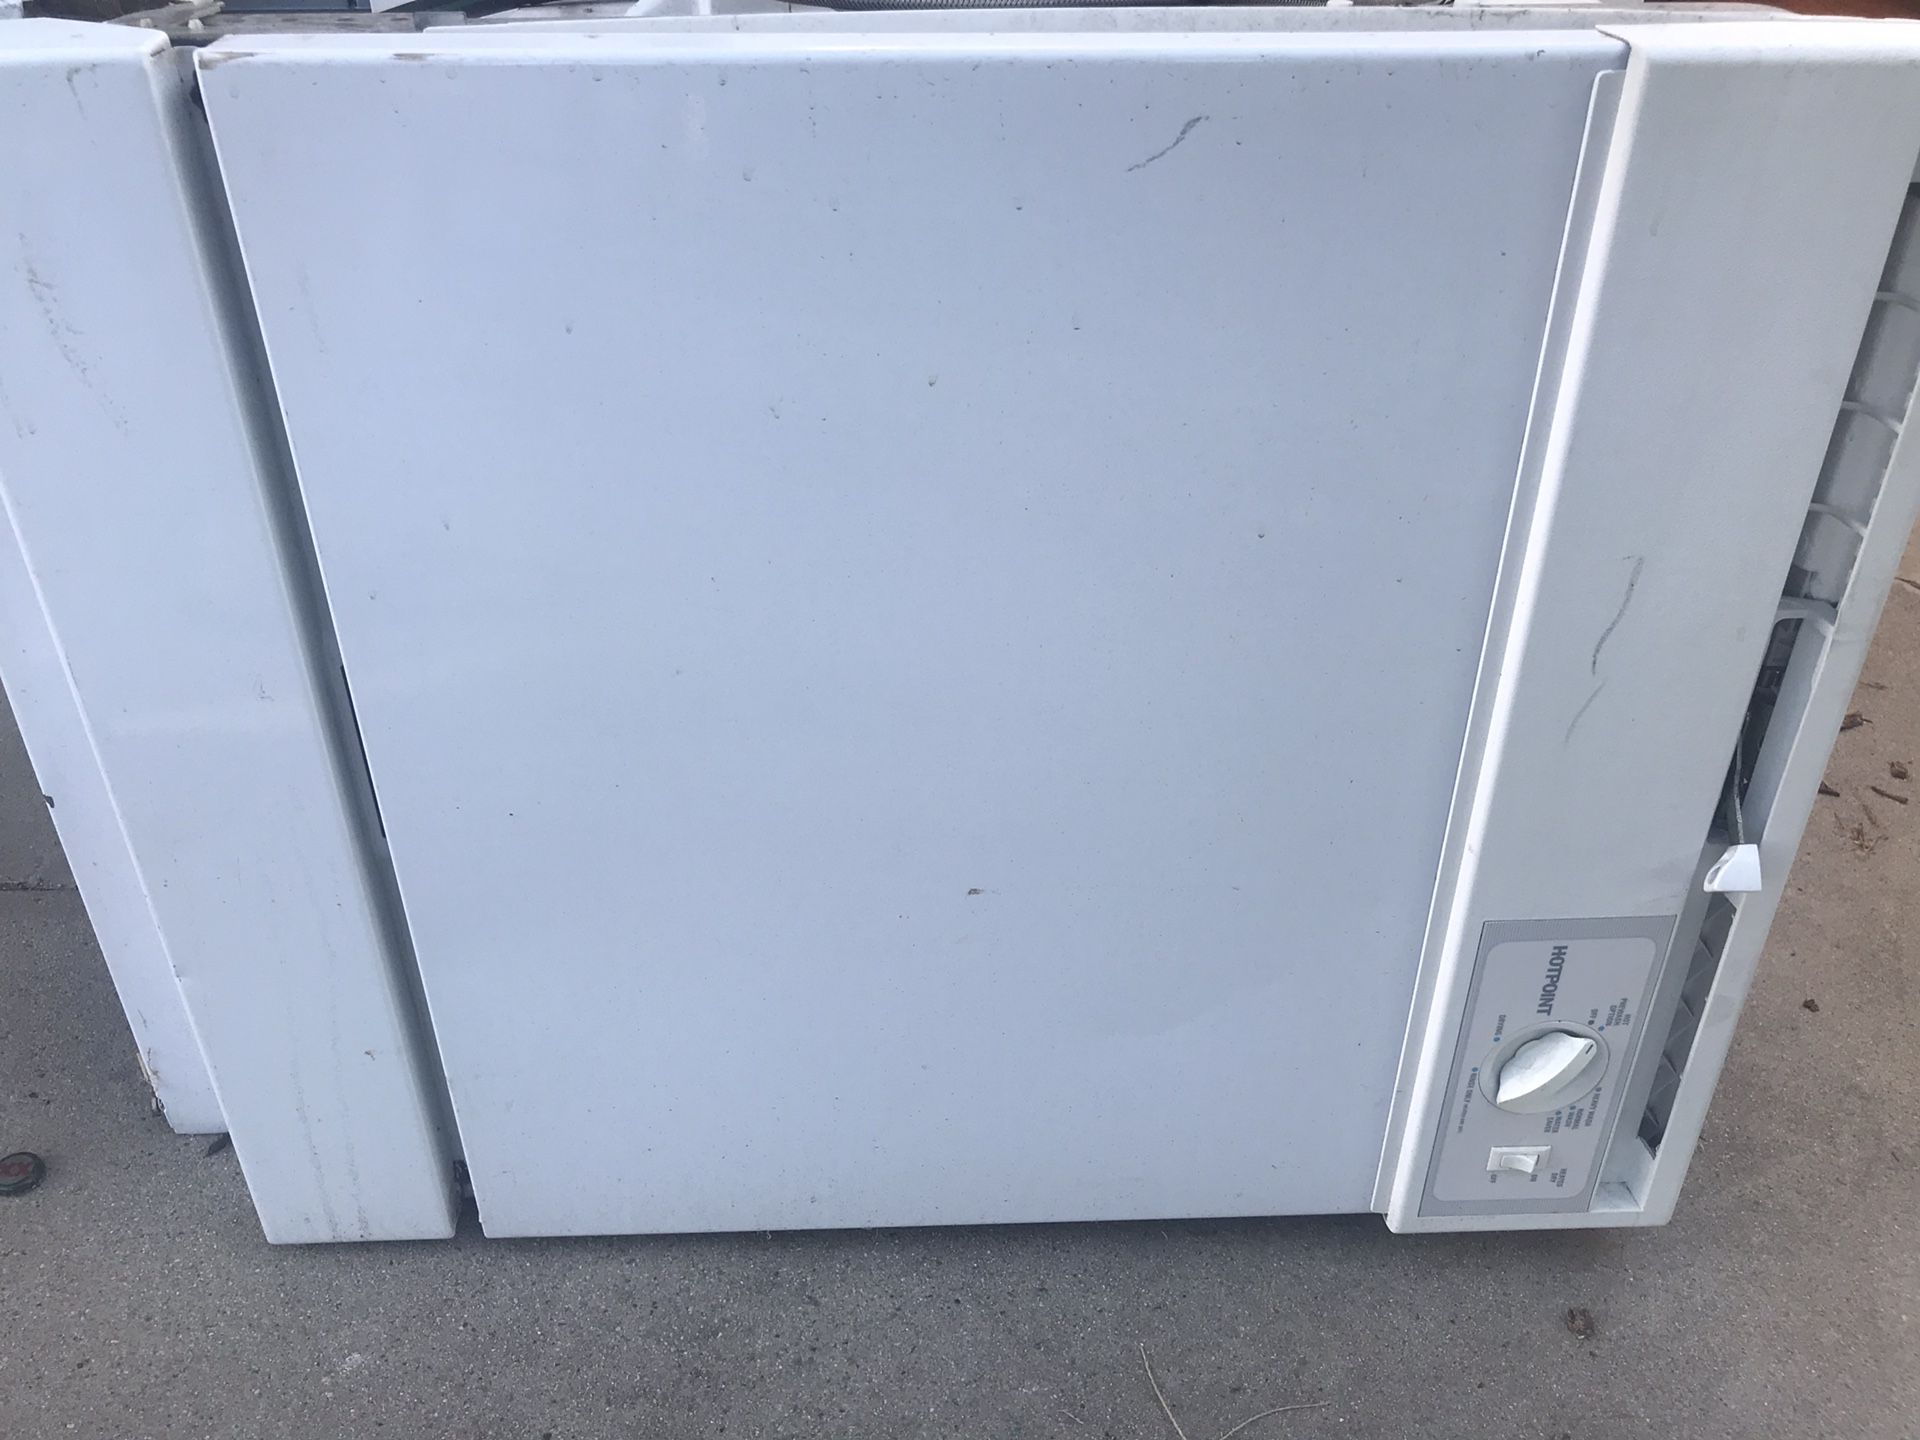 Free dishwasher ( if the ad is up, item is available)